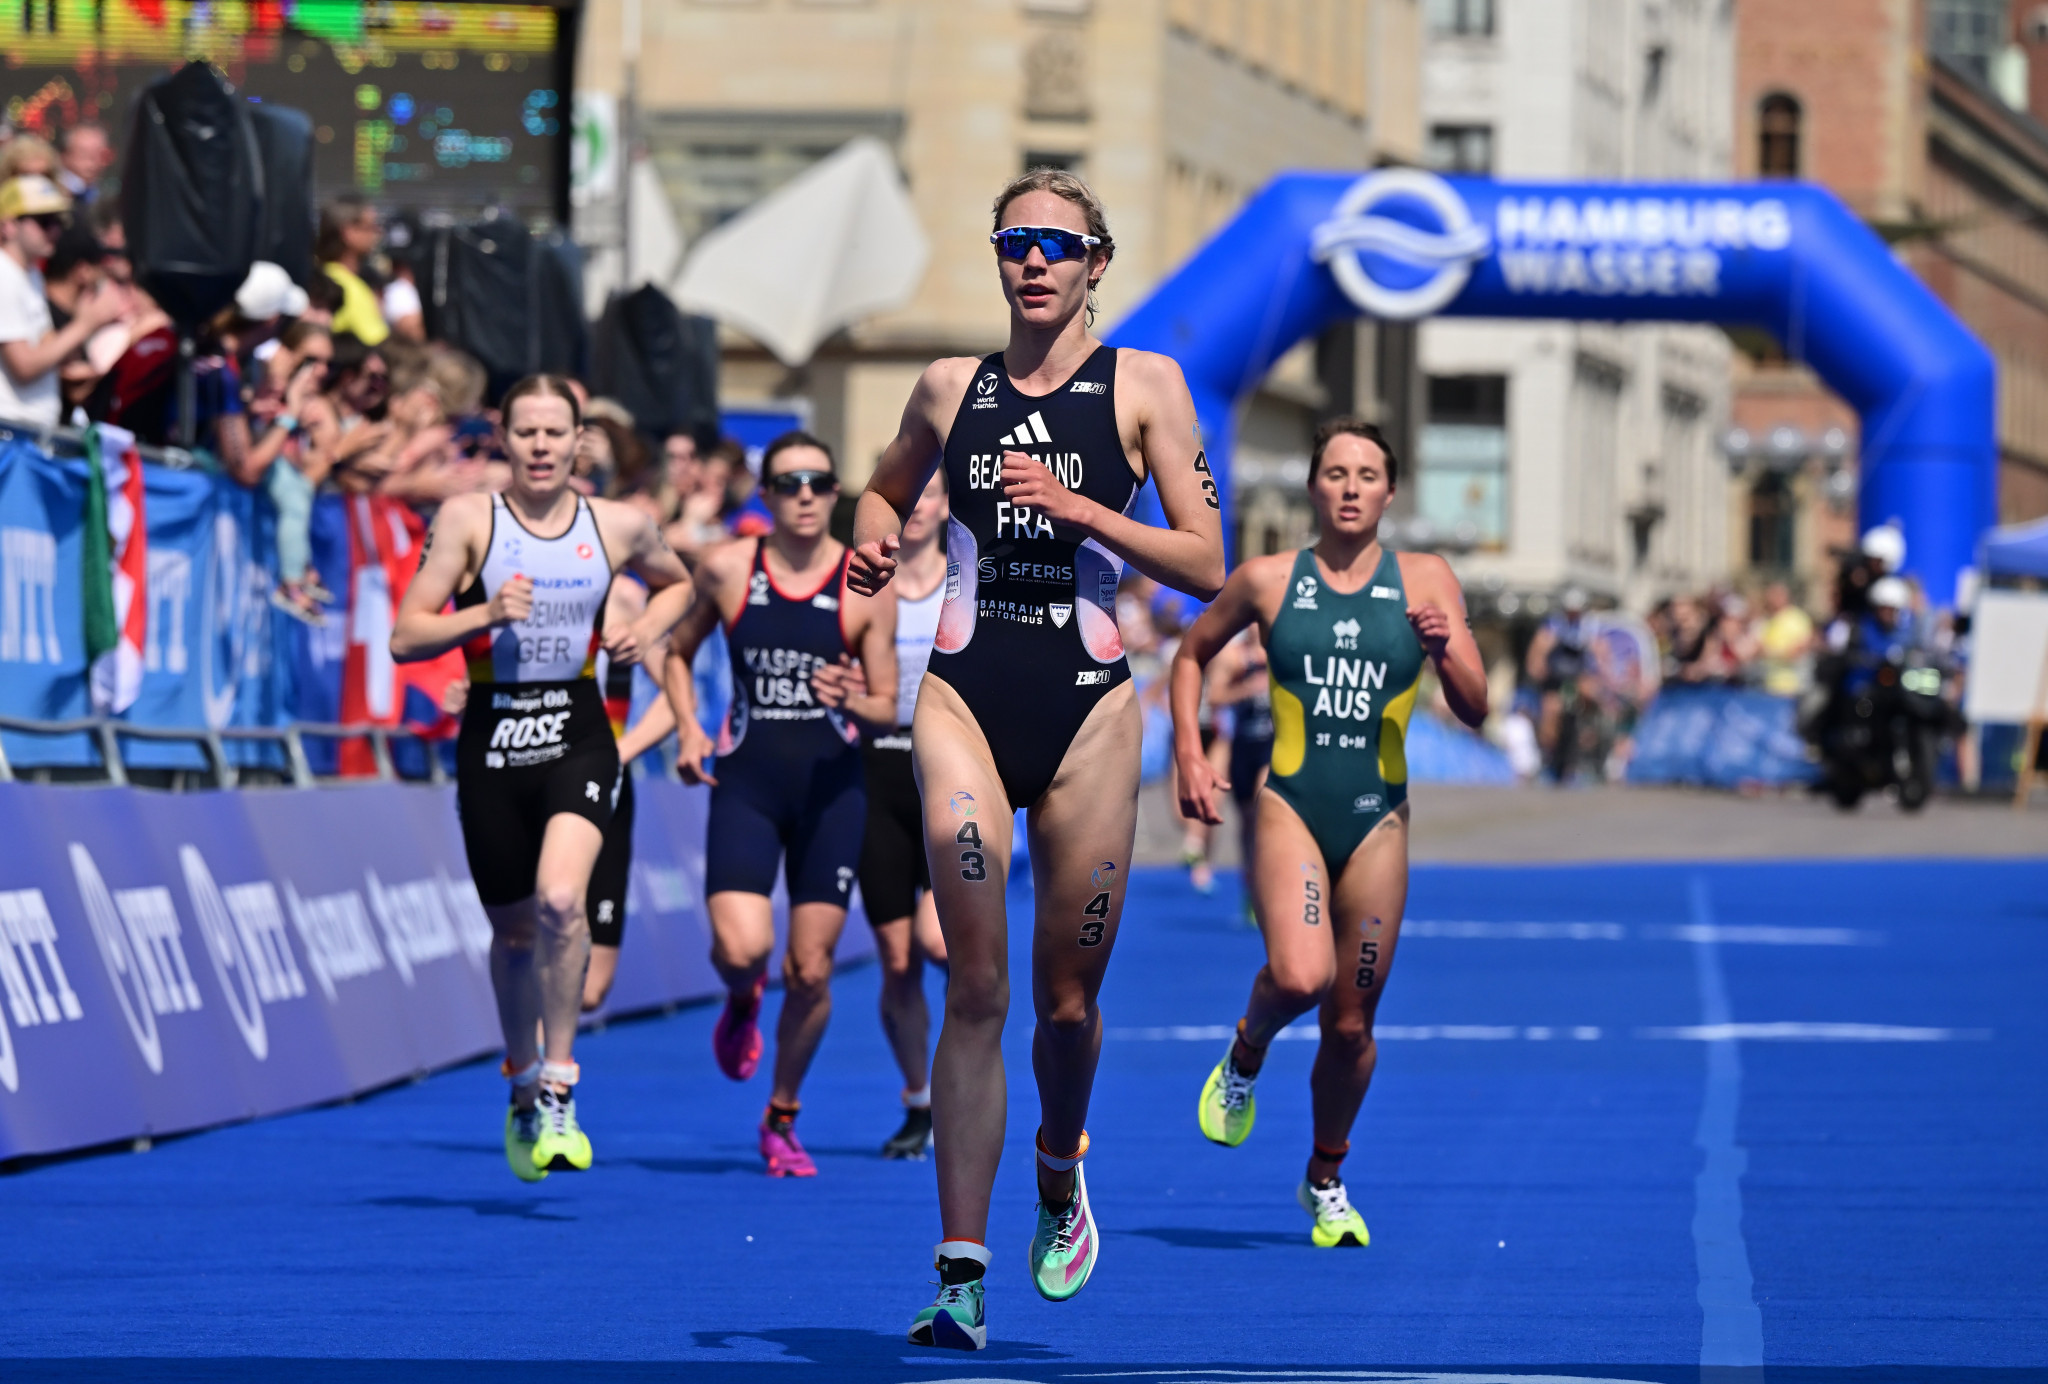 Frenchwoman Cassandre Beaugrand set the quickest time overall in the women's discipline with 21:51 to seal her place in the final ©World Triathlon